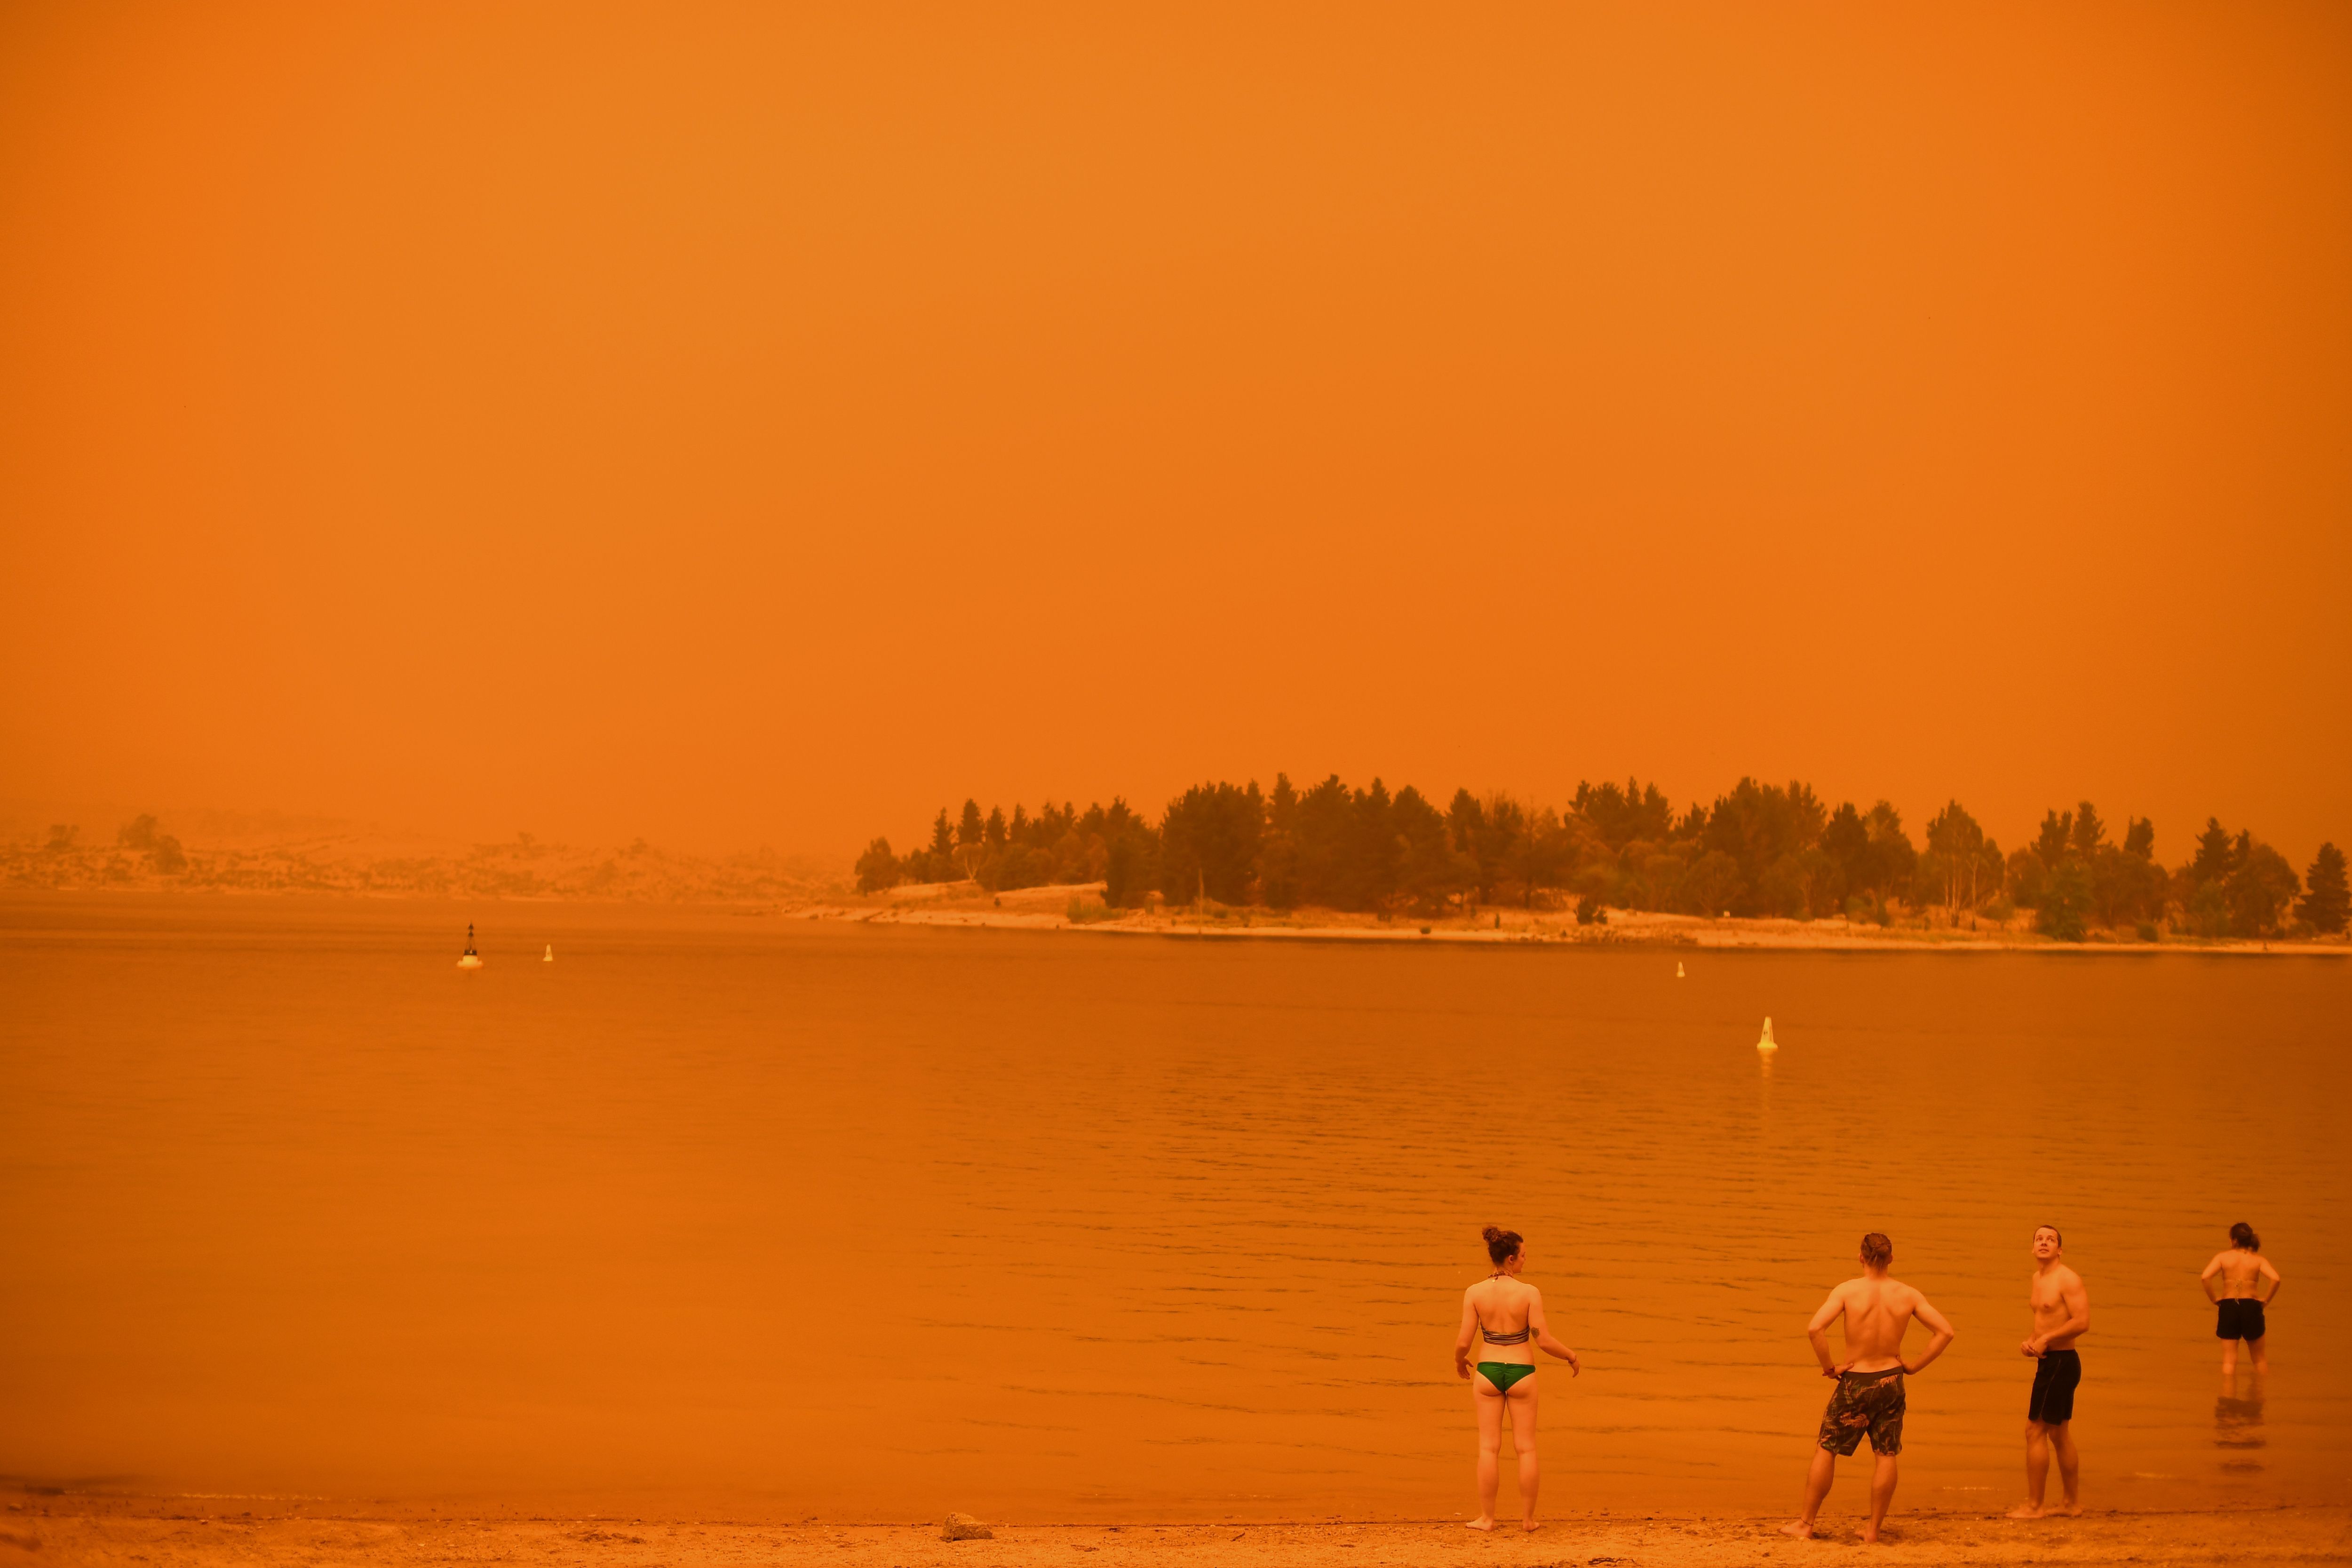  Residents take a dip to cool down at Lake Jindabyne, under a red sky due to smoke from bushfires, in the town of Jindabyne in New South Wales 